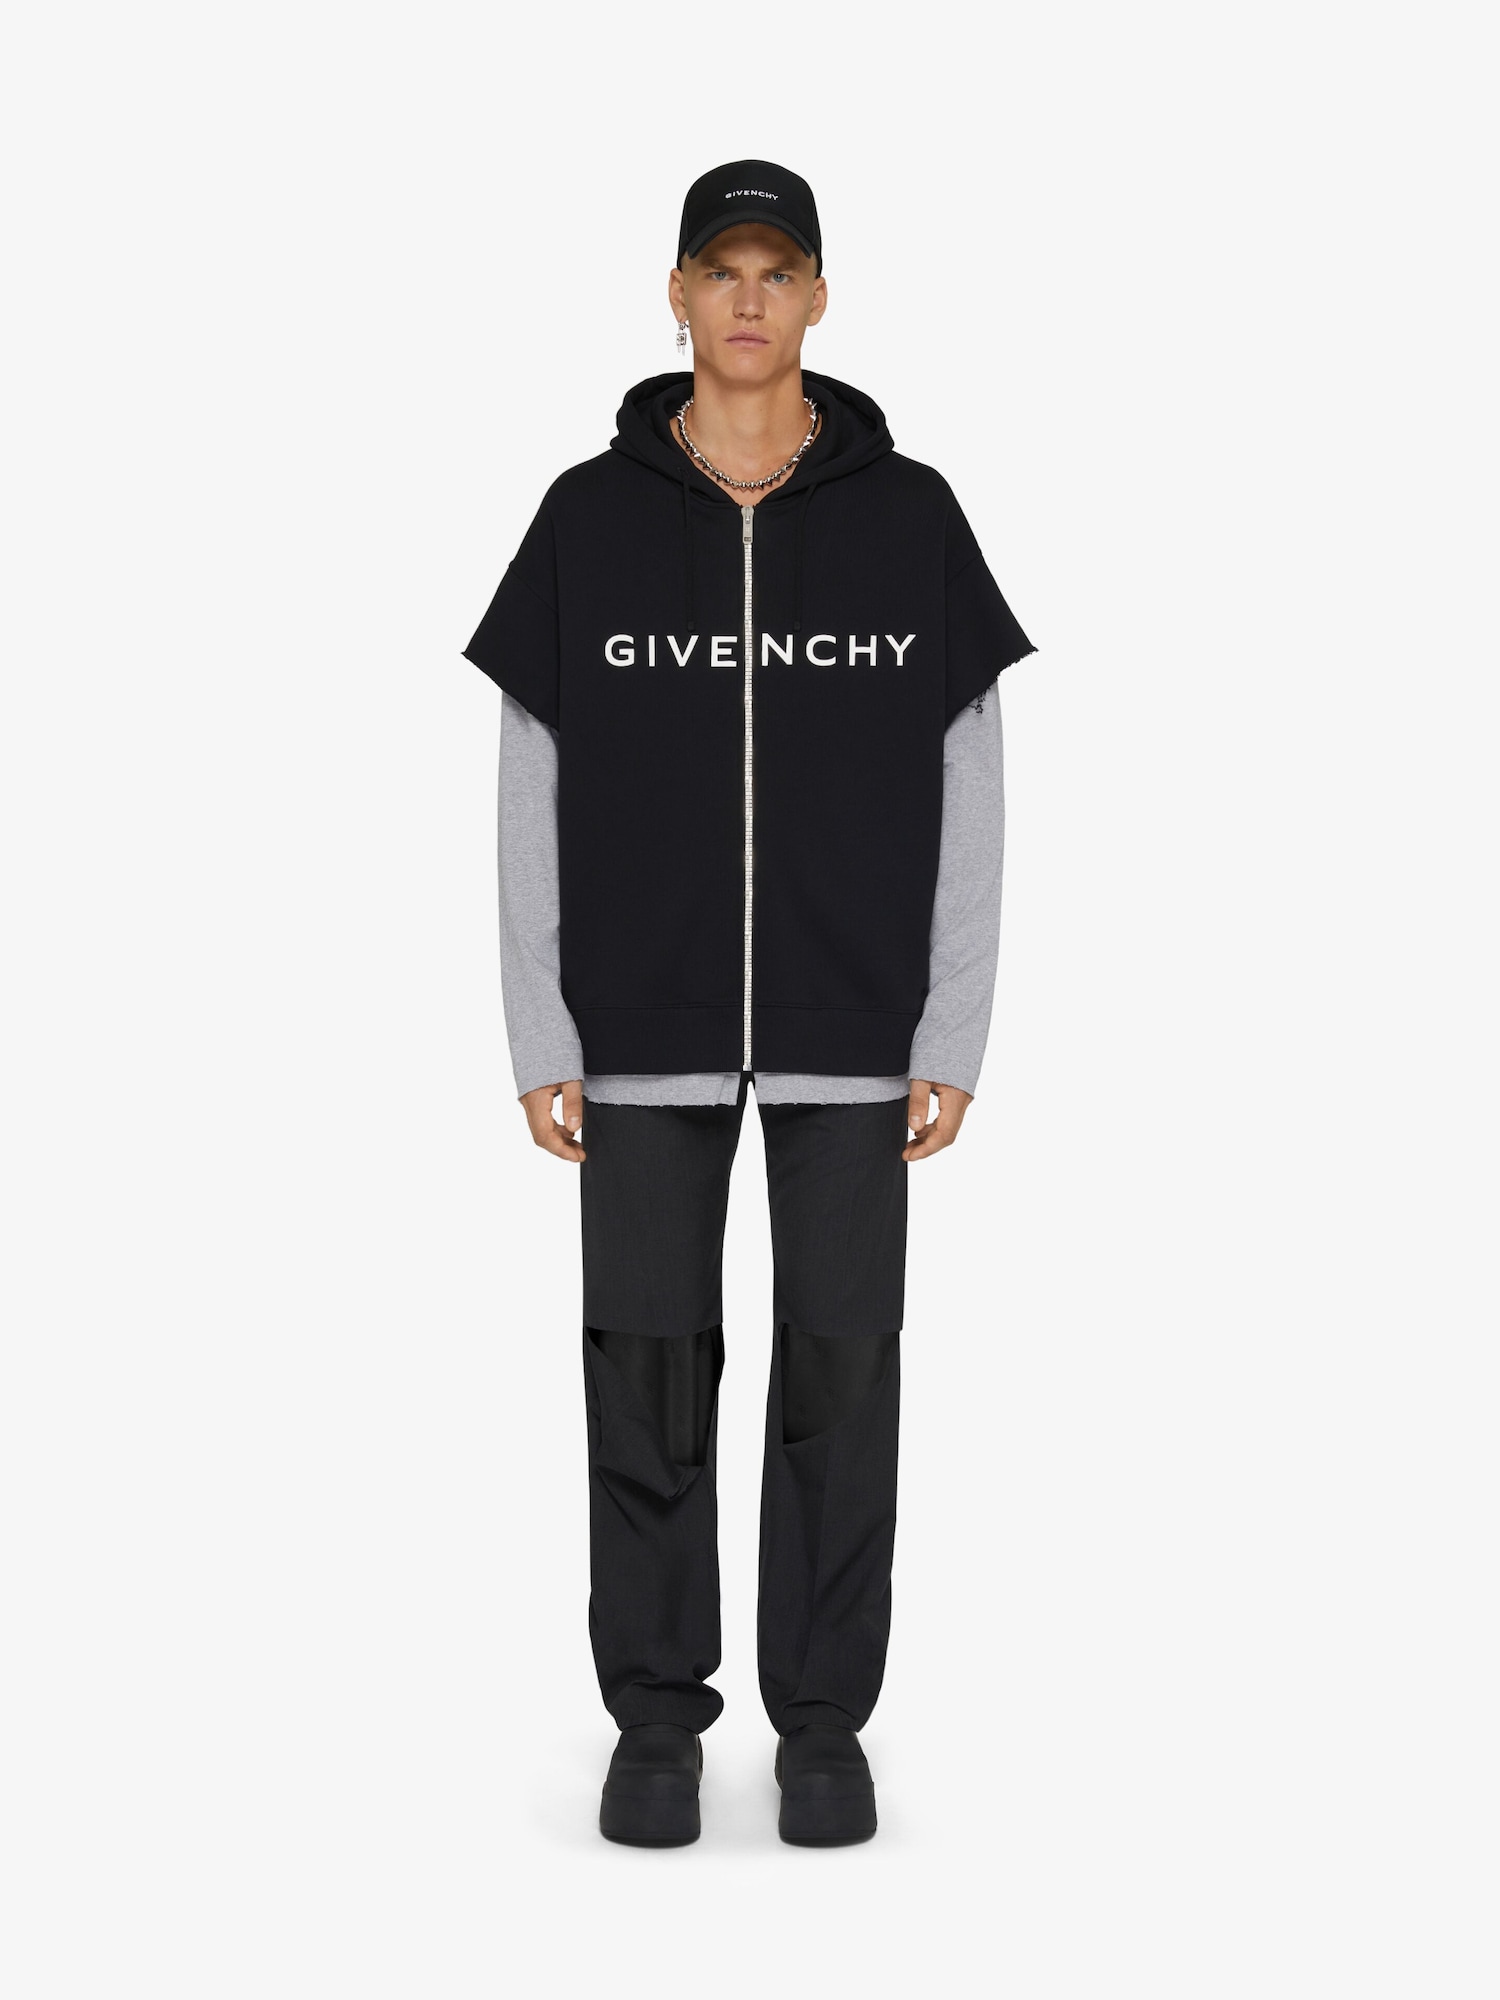 GIVENCHY Archetype Cut & Layer zipped hoodie - black/grey | Givenchy US